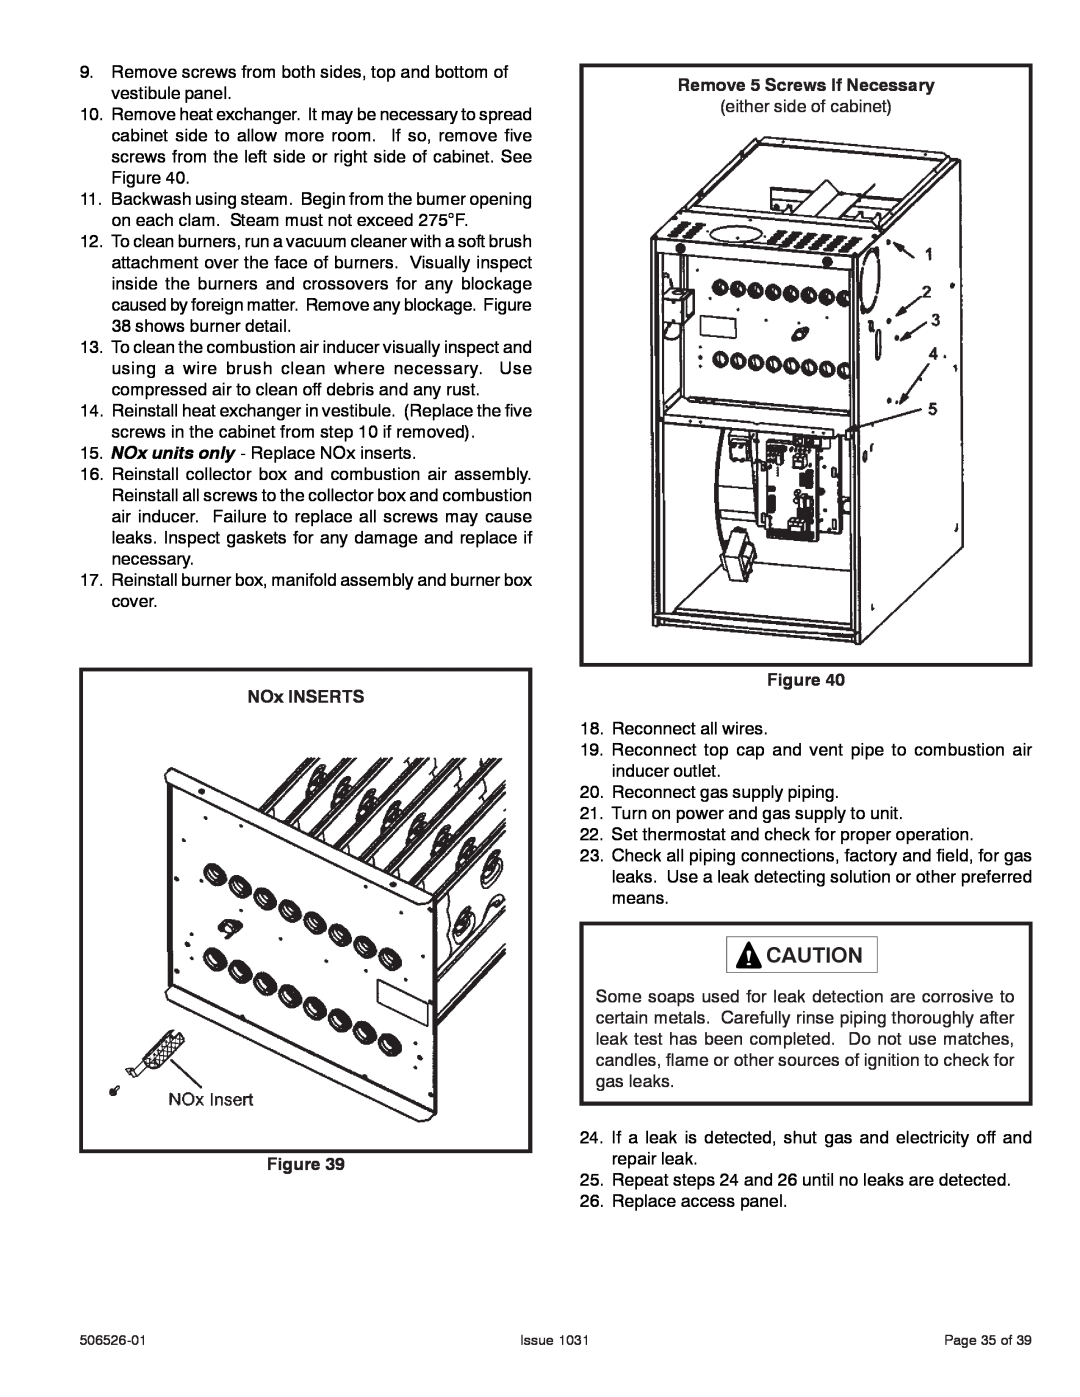 Allied Air Enterprises 80G1UH, A80UH installation instructions Remove 5 Screws If Necessary, NOx INSERTS Figure 